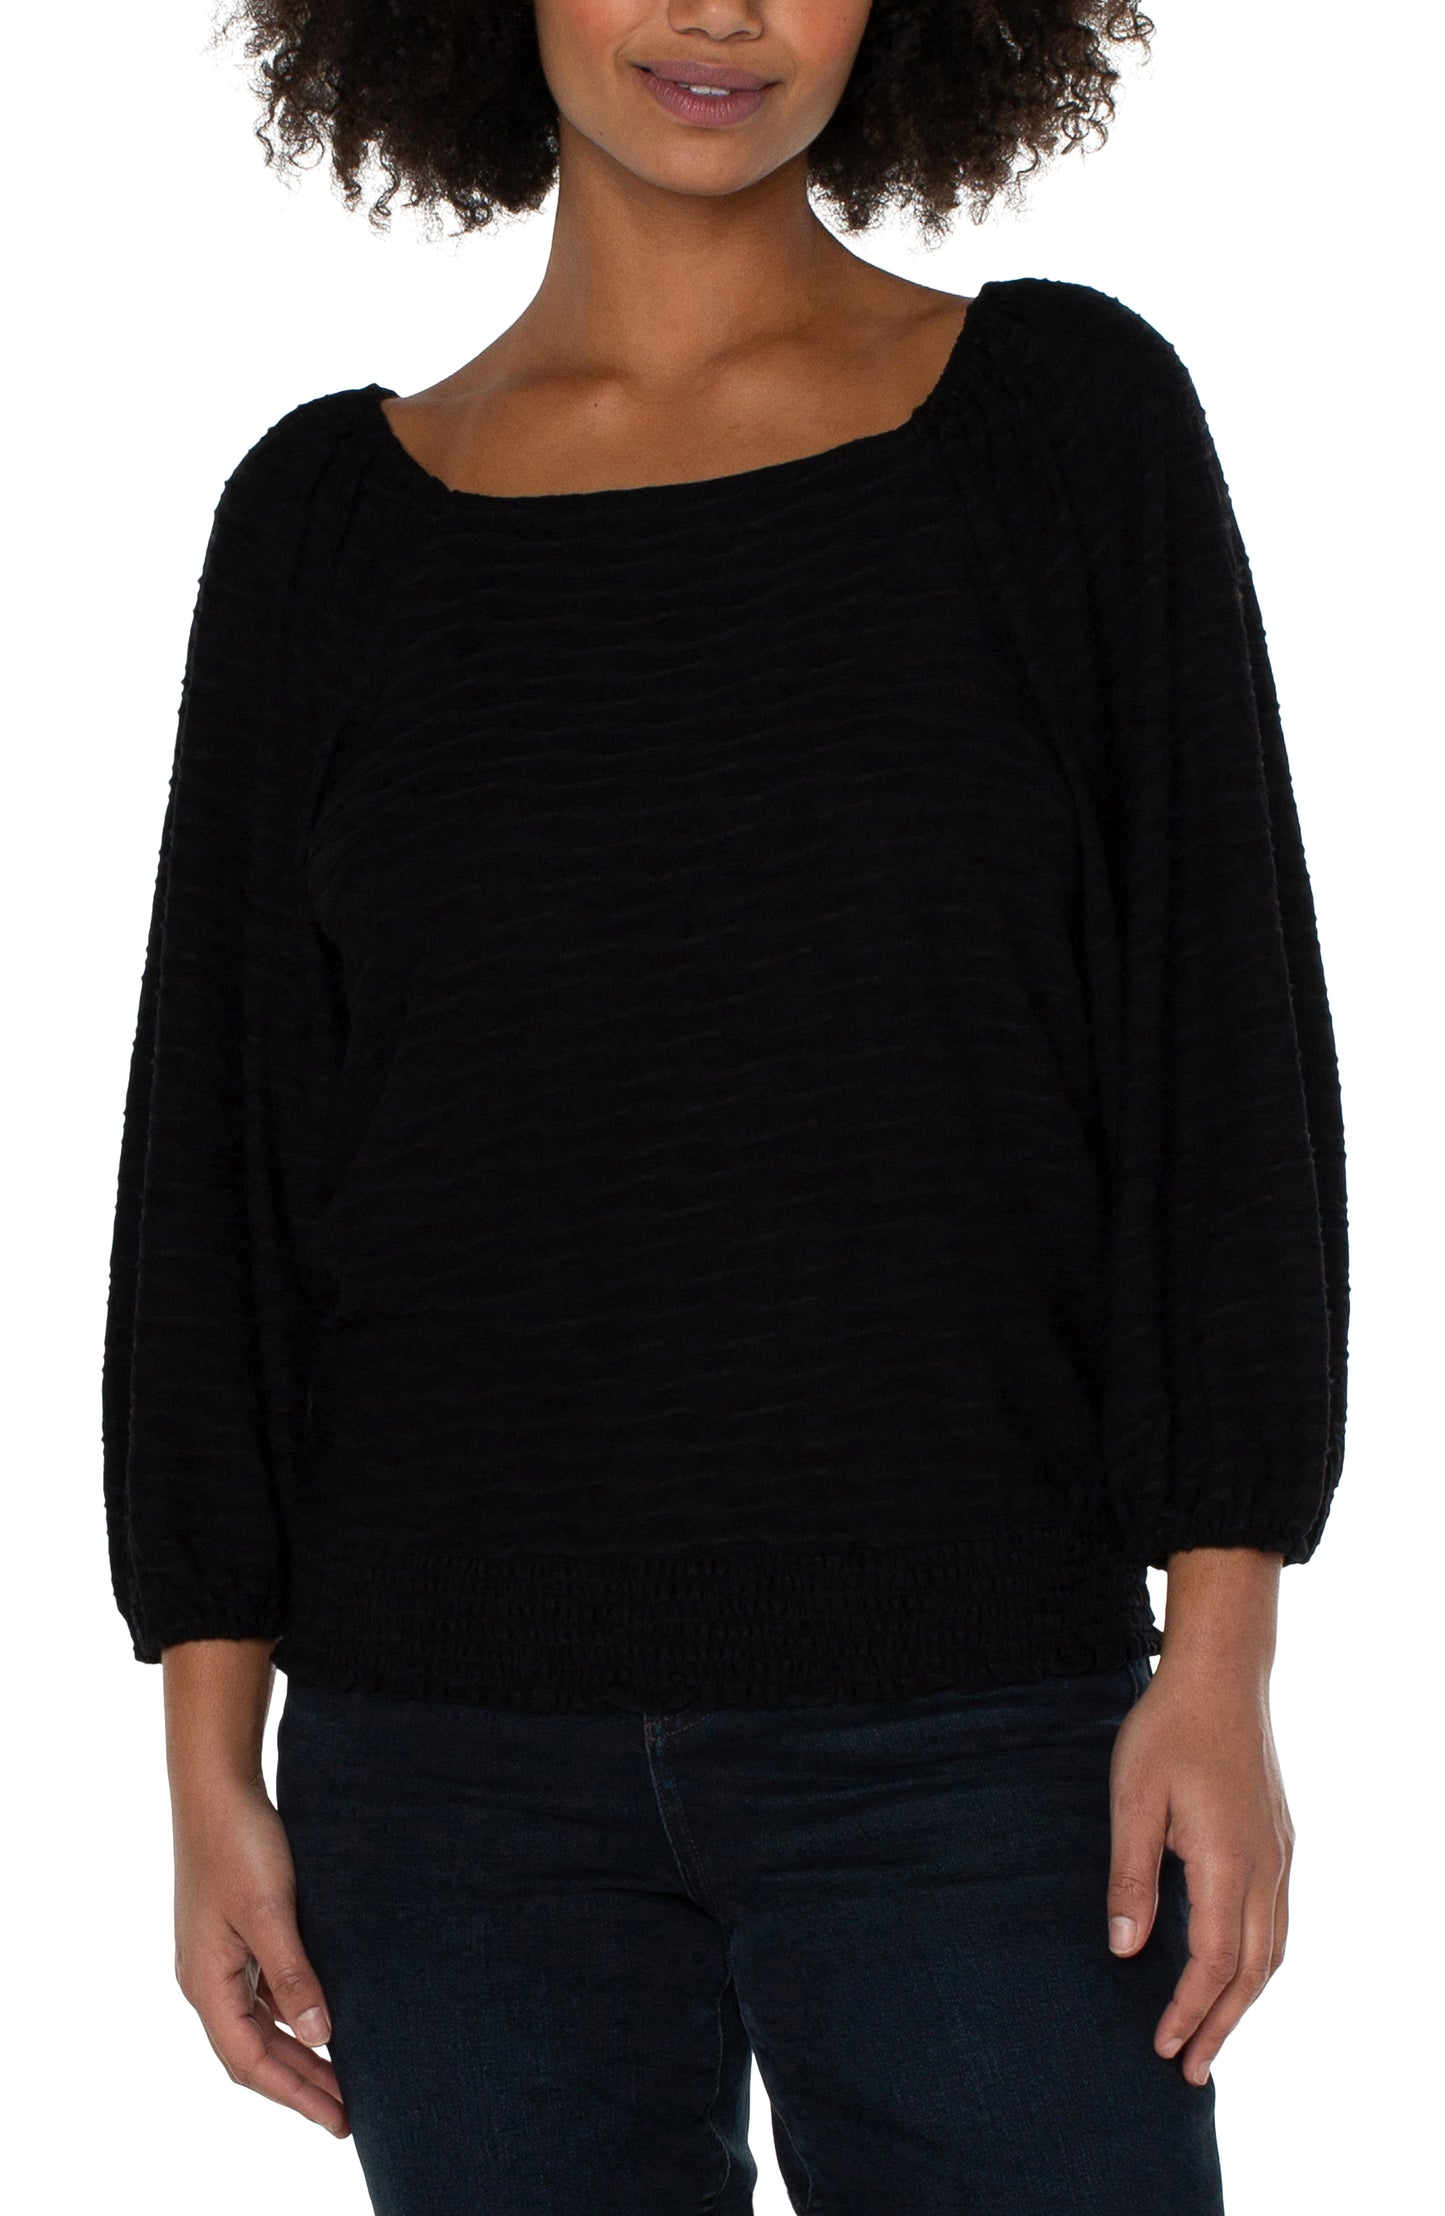 Liverpool 3/4 Puff Sleeve Square Neck Knit Top w/Smocking (Black)